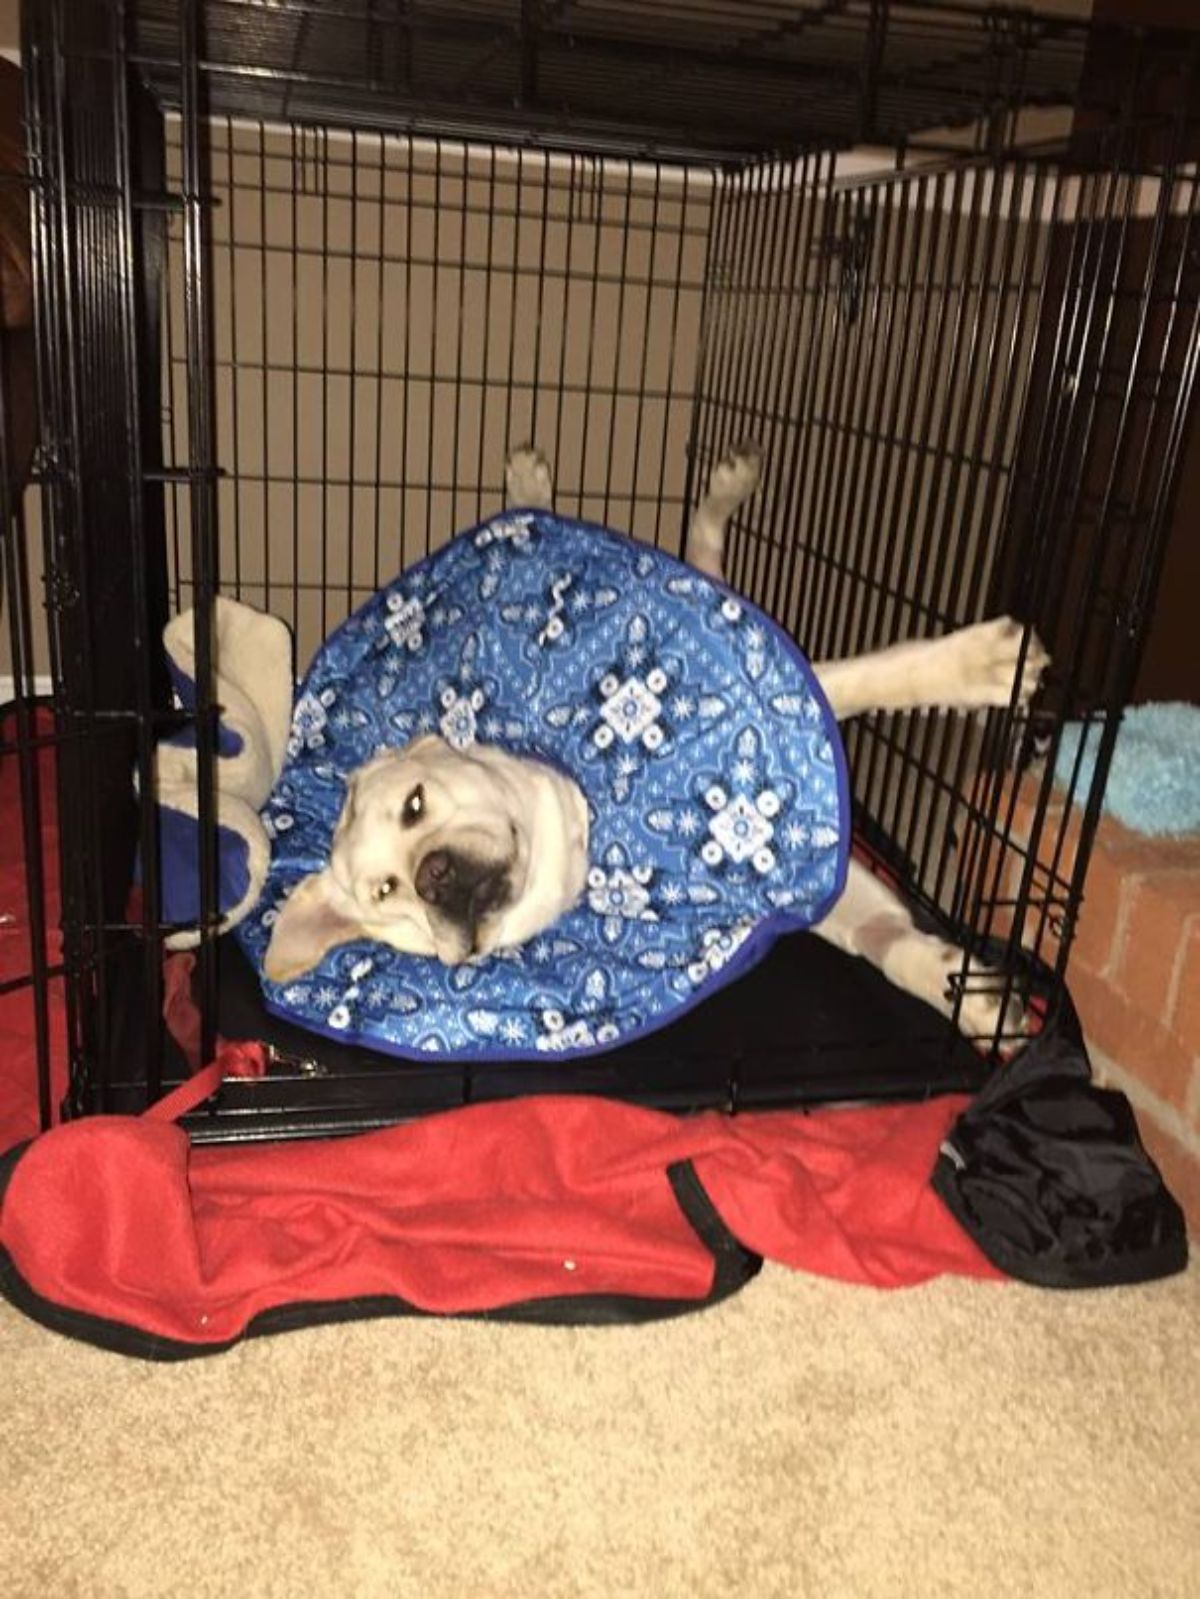 yellow labrador retriever laying sideways in a black dog crate wearing a blue and white patterned cone